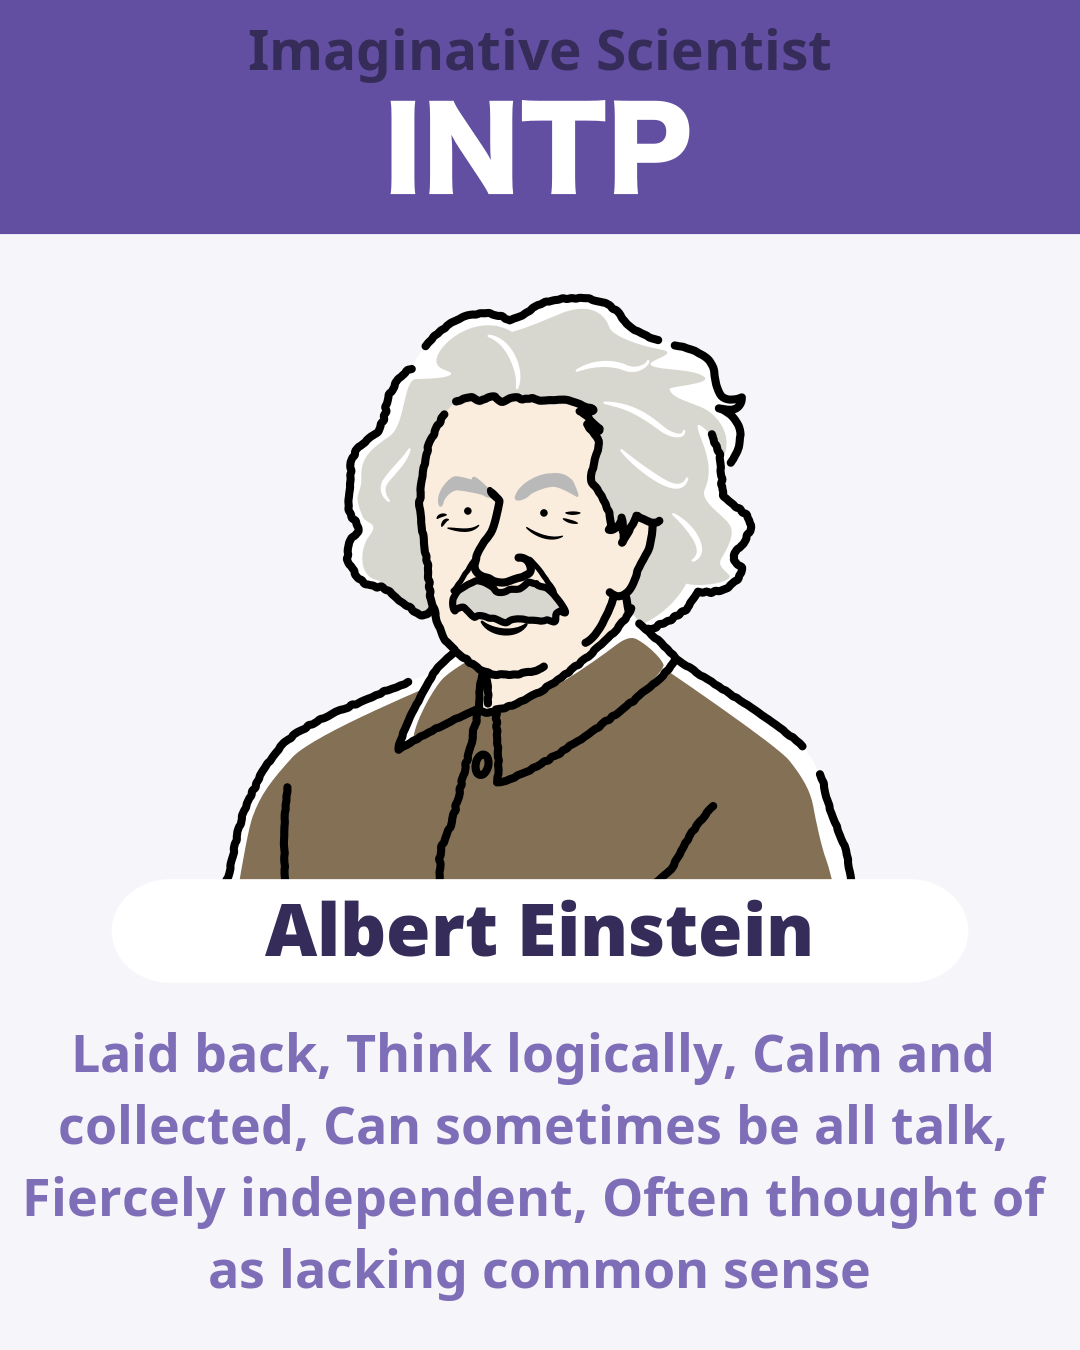 The INTP Architect Personality Type